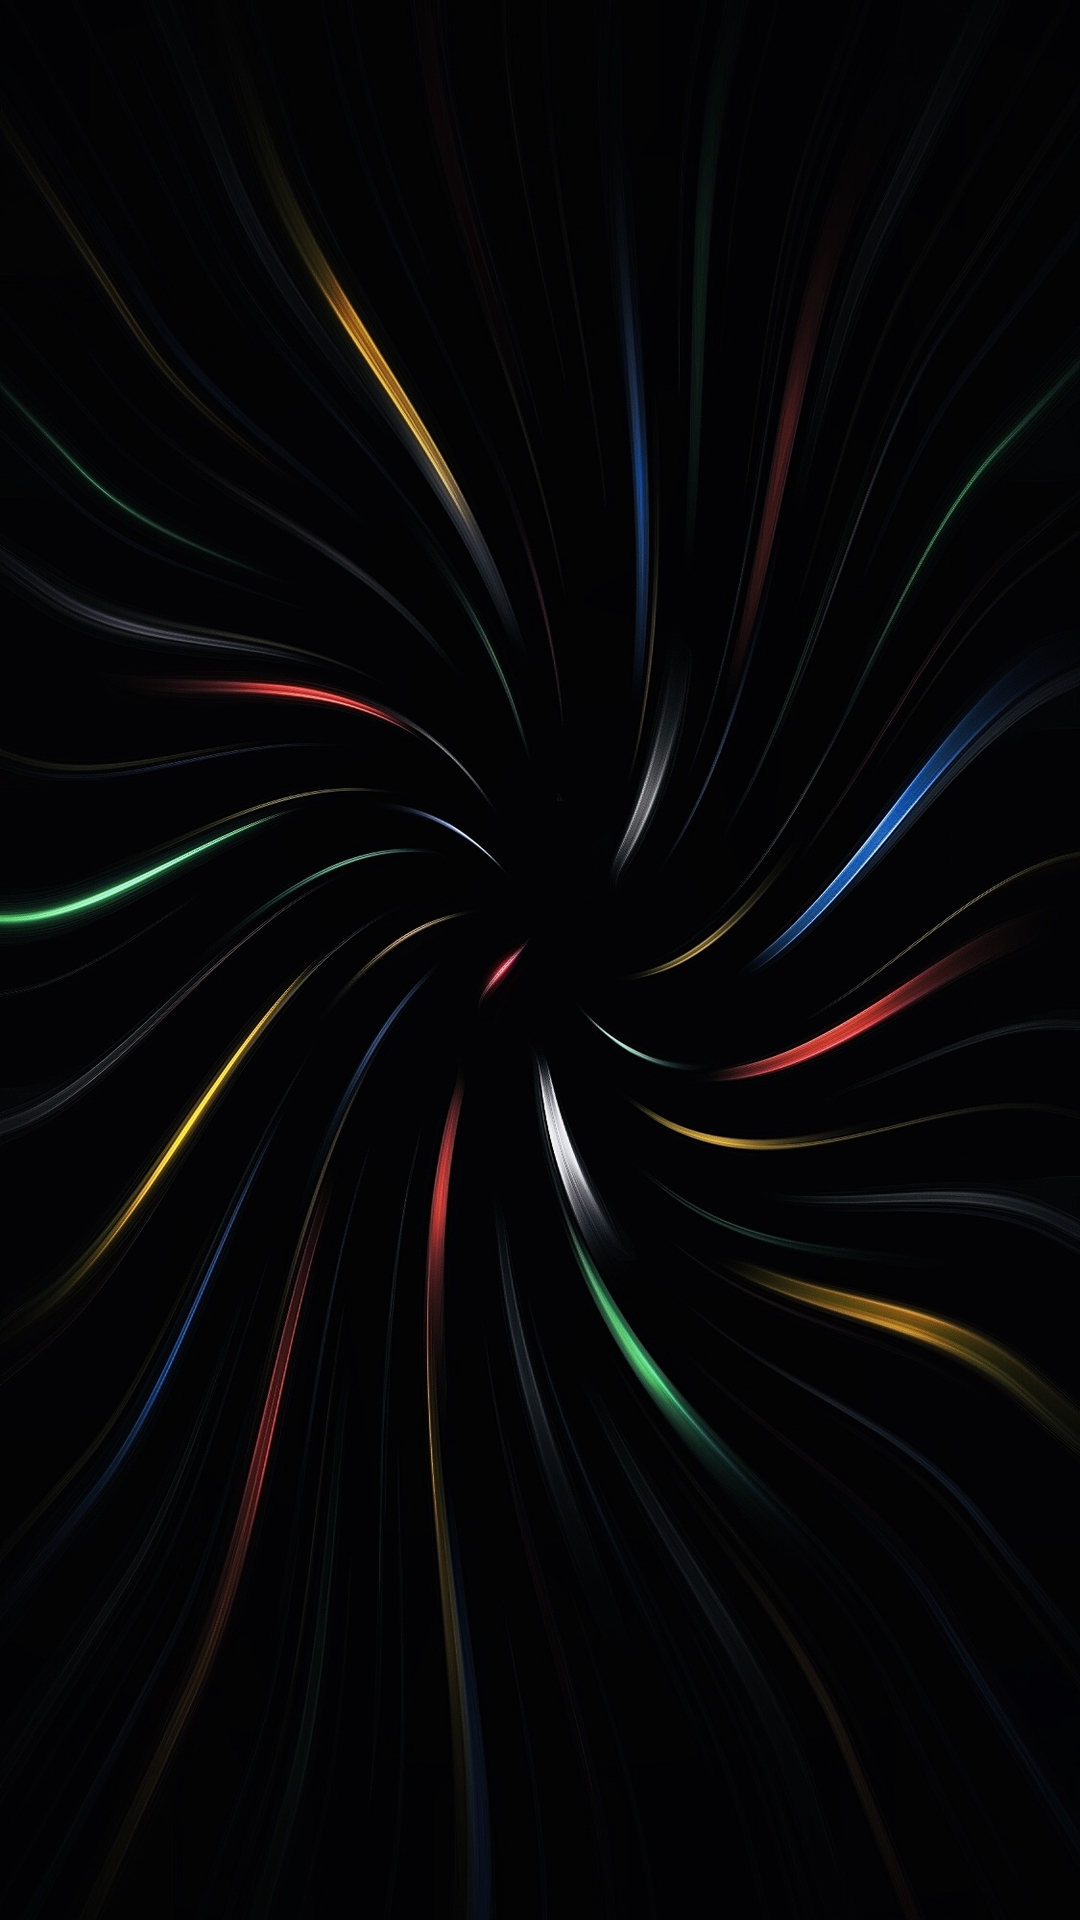 1080x1920 Abstract Wallpaper Vivid Contrasting Colors Pack 3